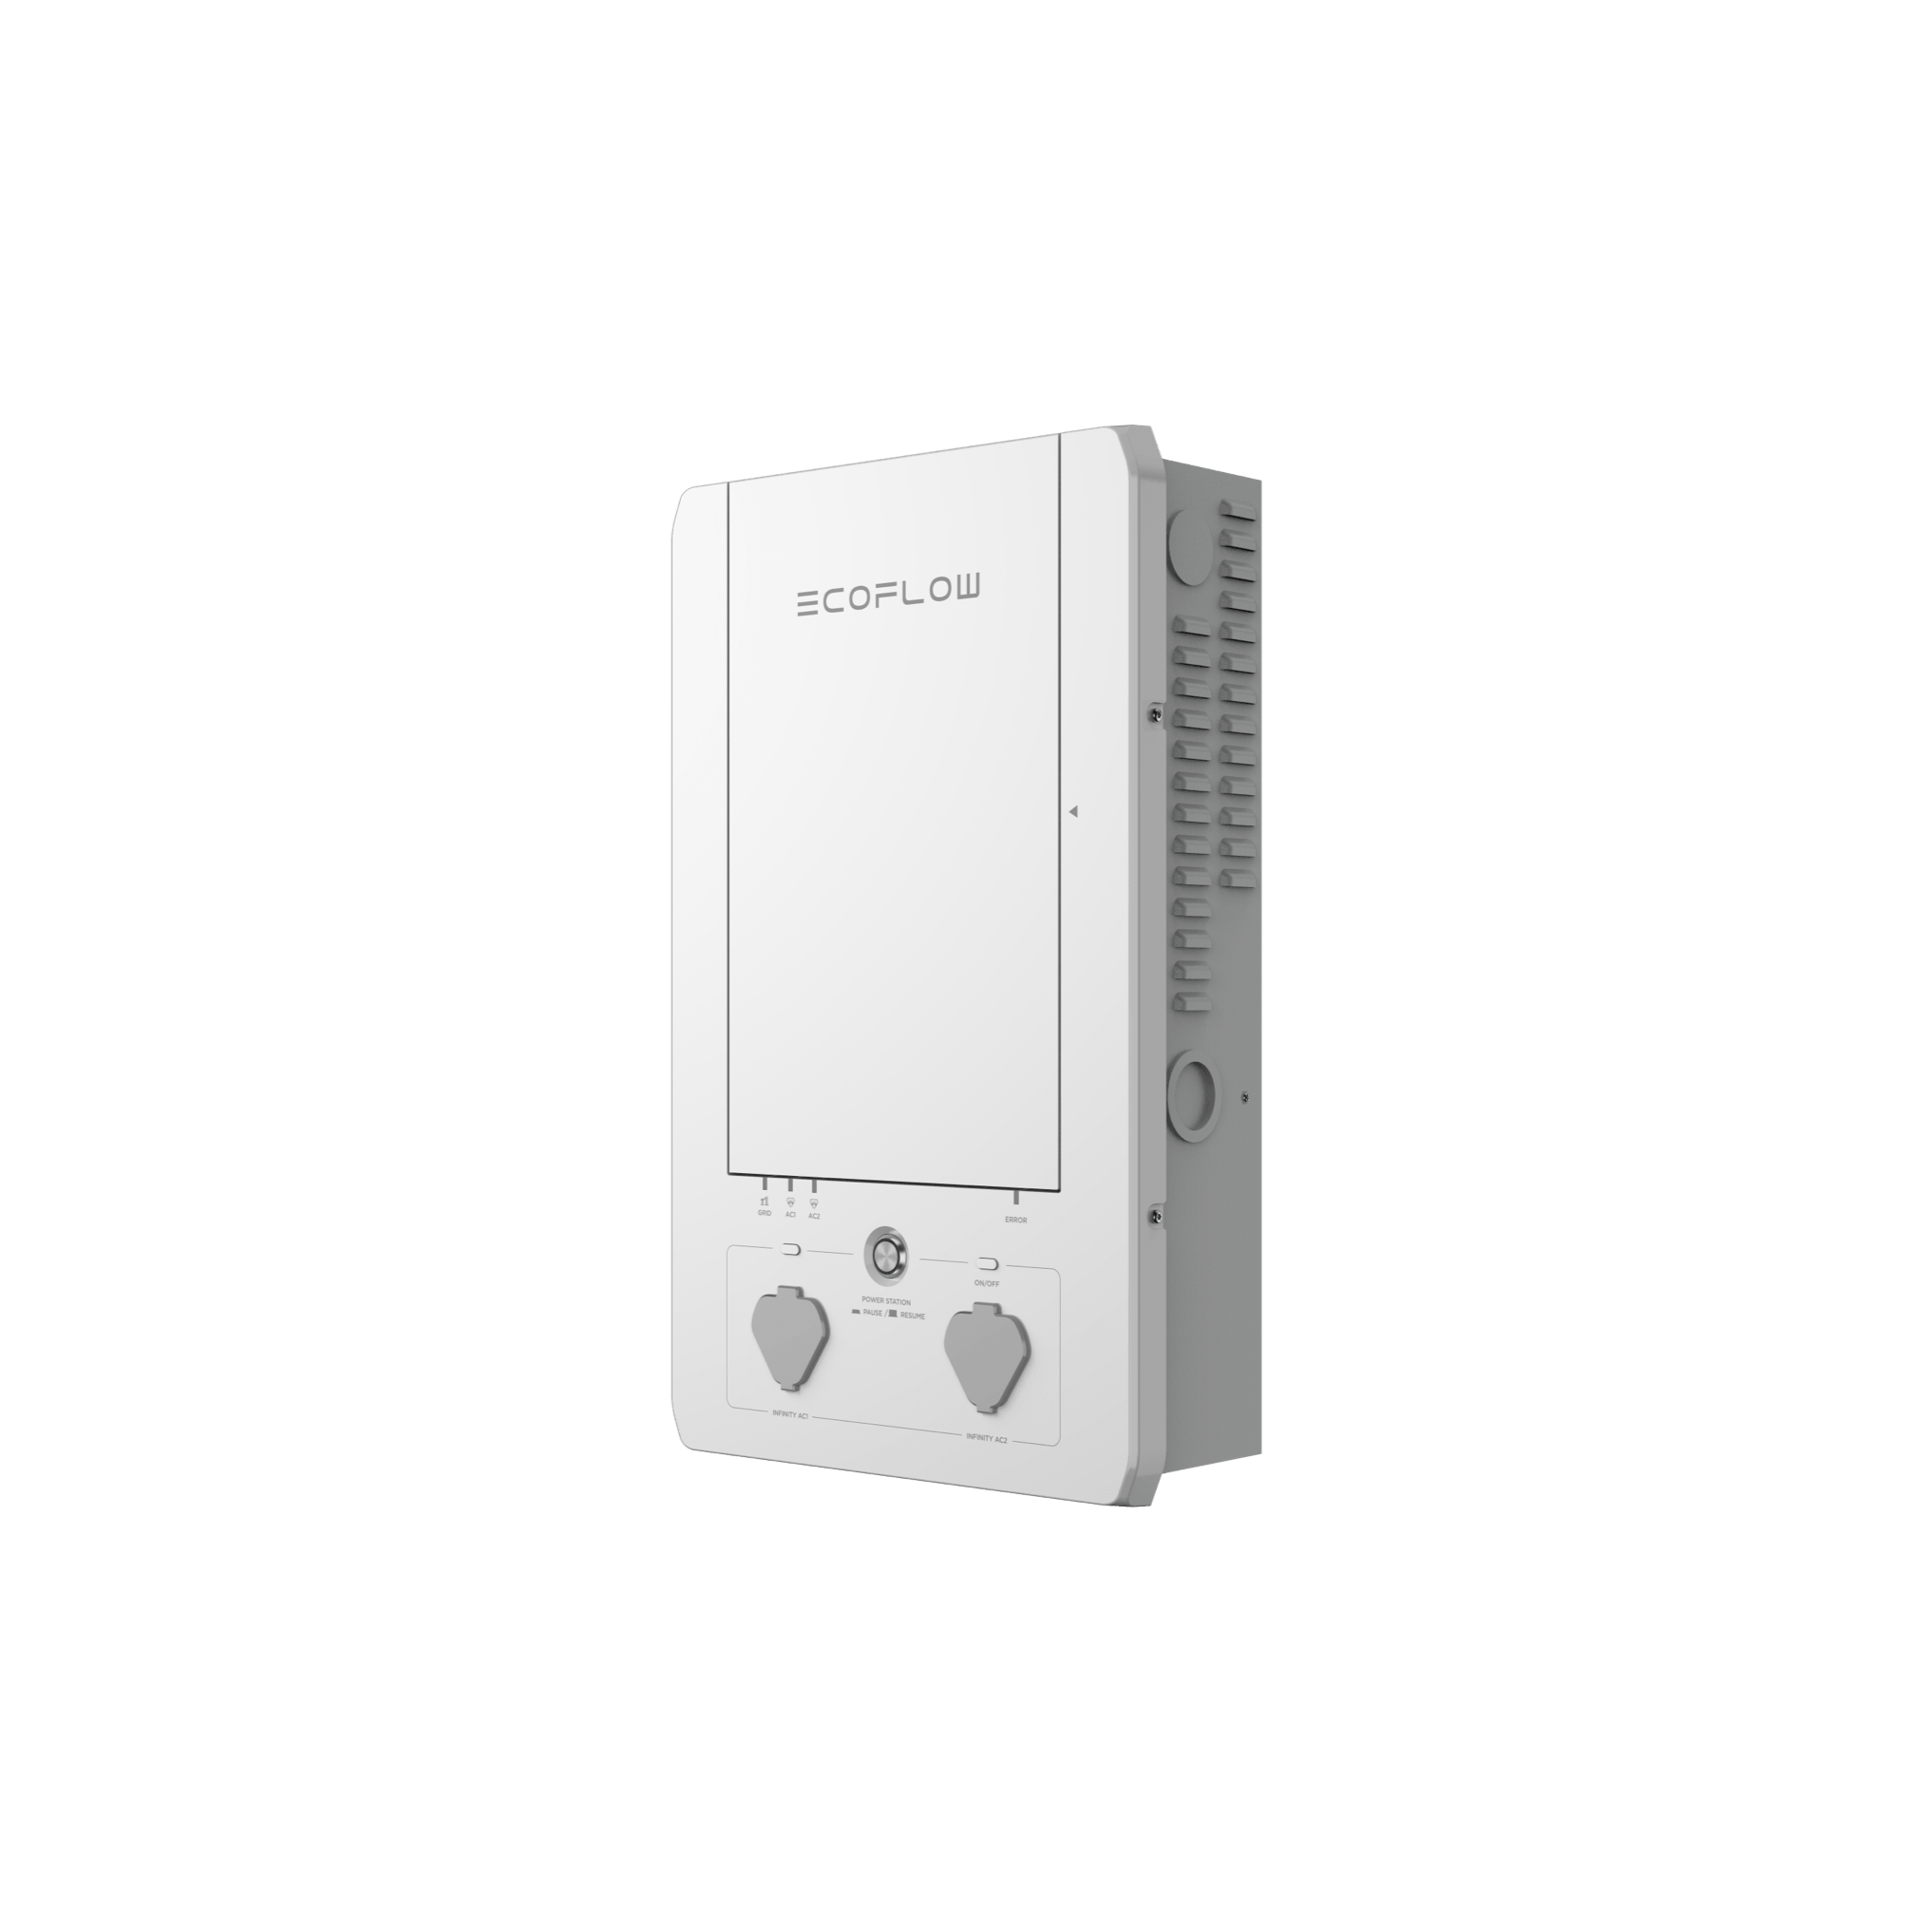 EcoFlow EcoFlow Smart Home Panel (Recommended Accessory) Giving Back Default Combo [ 1xSmart Home Panel + 5xRelay Module(15A) + 5xRelay Module(20A) + 3xRelay Module(30A) ]